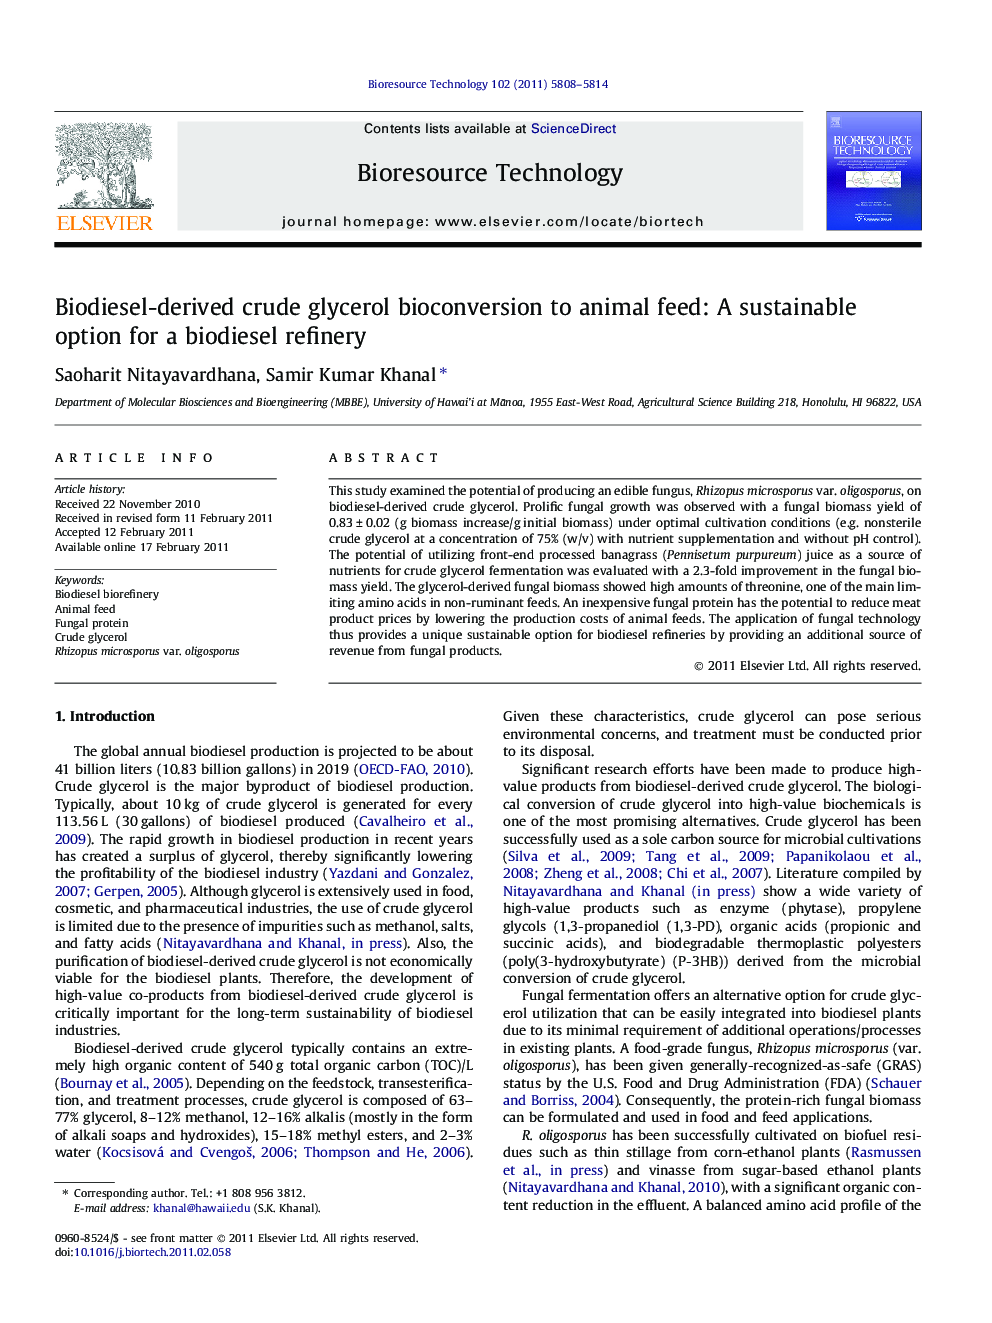 Biodiesel-derived crude glycerol bioconversion to animal feed: A sustainable option for a biodiesel refinery